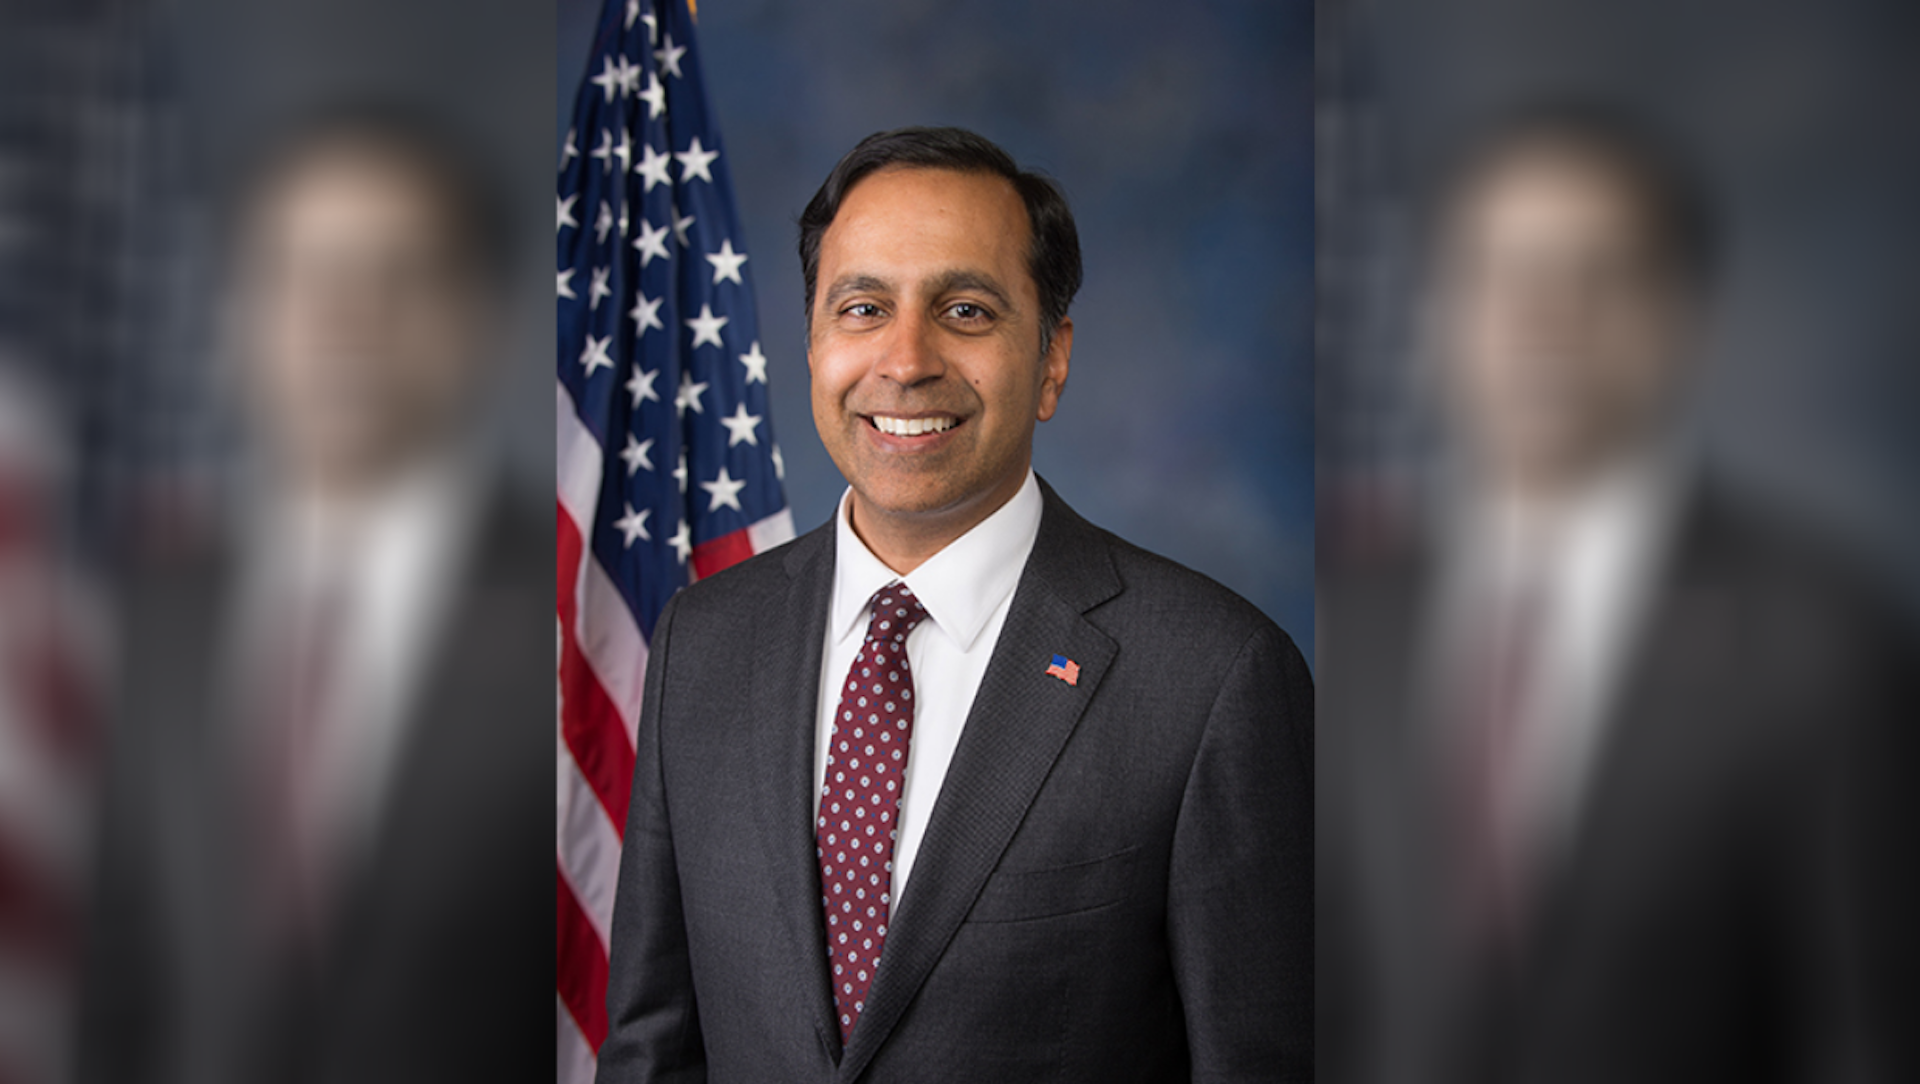 U.S. Rep. Raja Krishnamoorthi (D-IL) says aspects of a federal contract with Murrysville-based Philips Respironics seem "fishy."